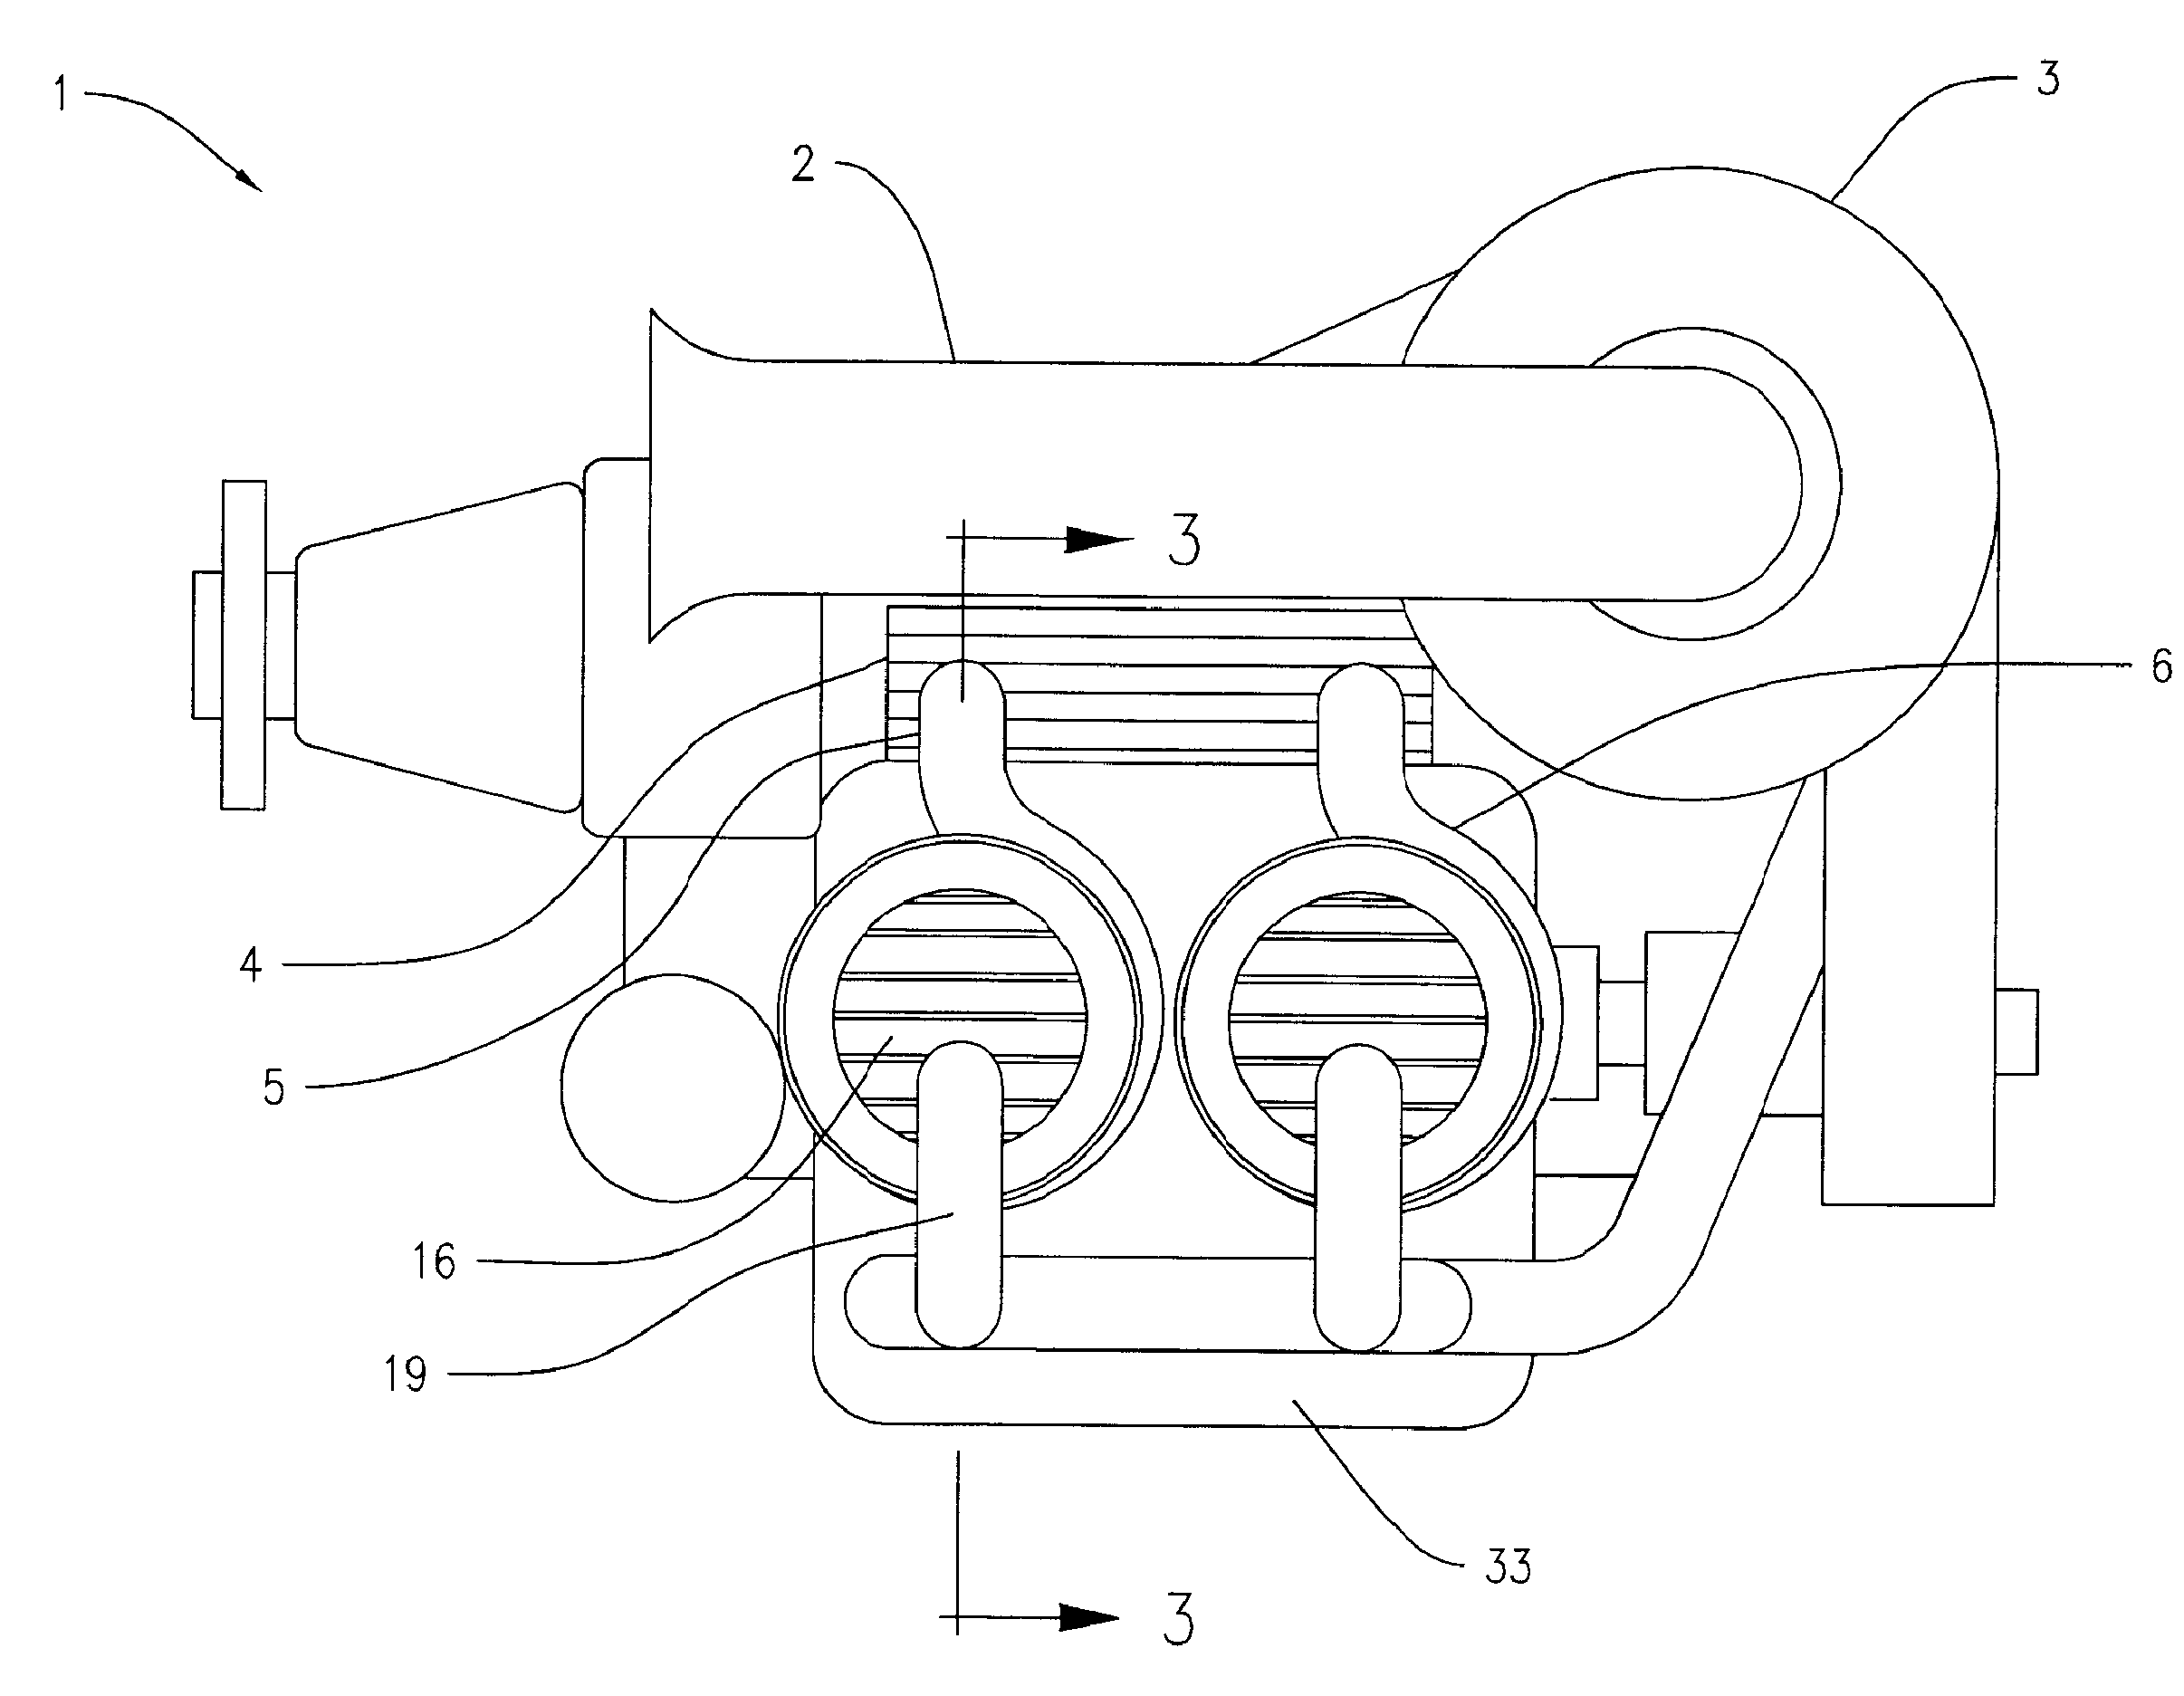 Two-Stroke Uniflow Turbo-Compound Internal Combustion Engine